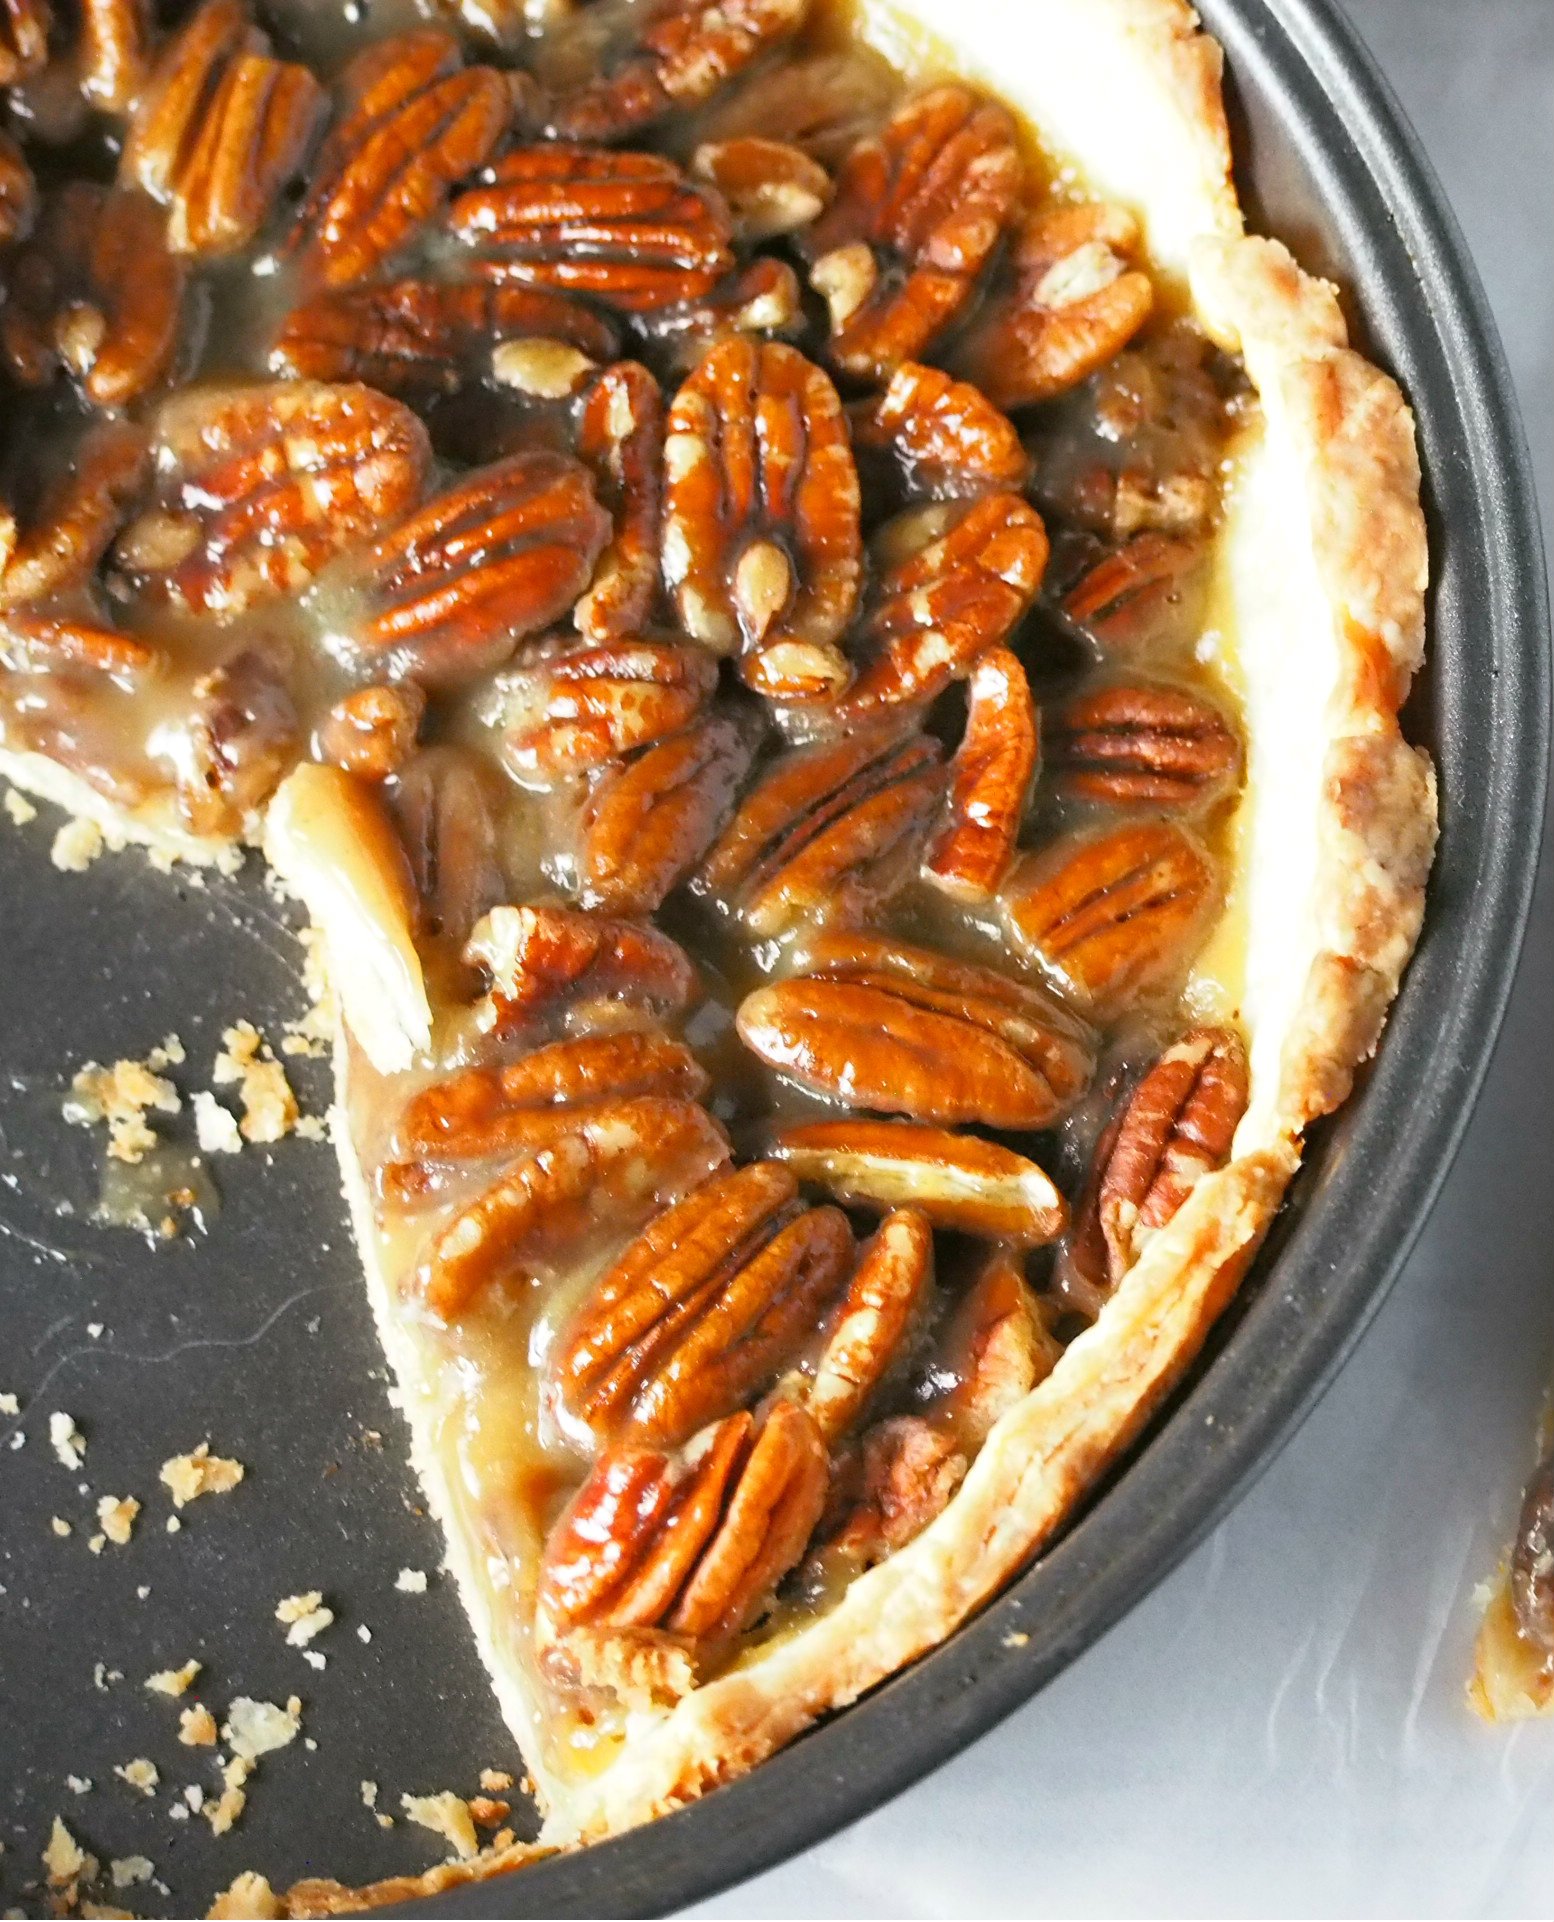 Make this easy Pecan Pie and indulge on these crunchy and sweet pecans nestled in a flaky cream cheese pie crust. This is ultimately a pecan overload dessert without being overly sweet and rich.